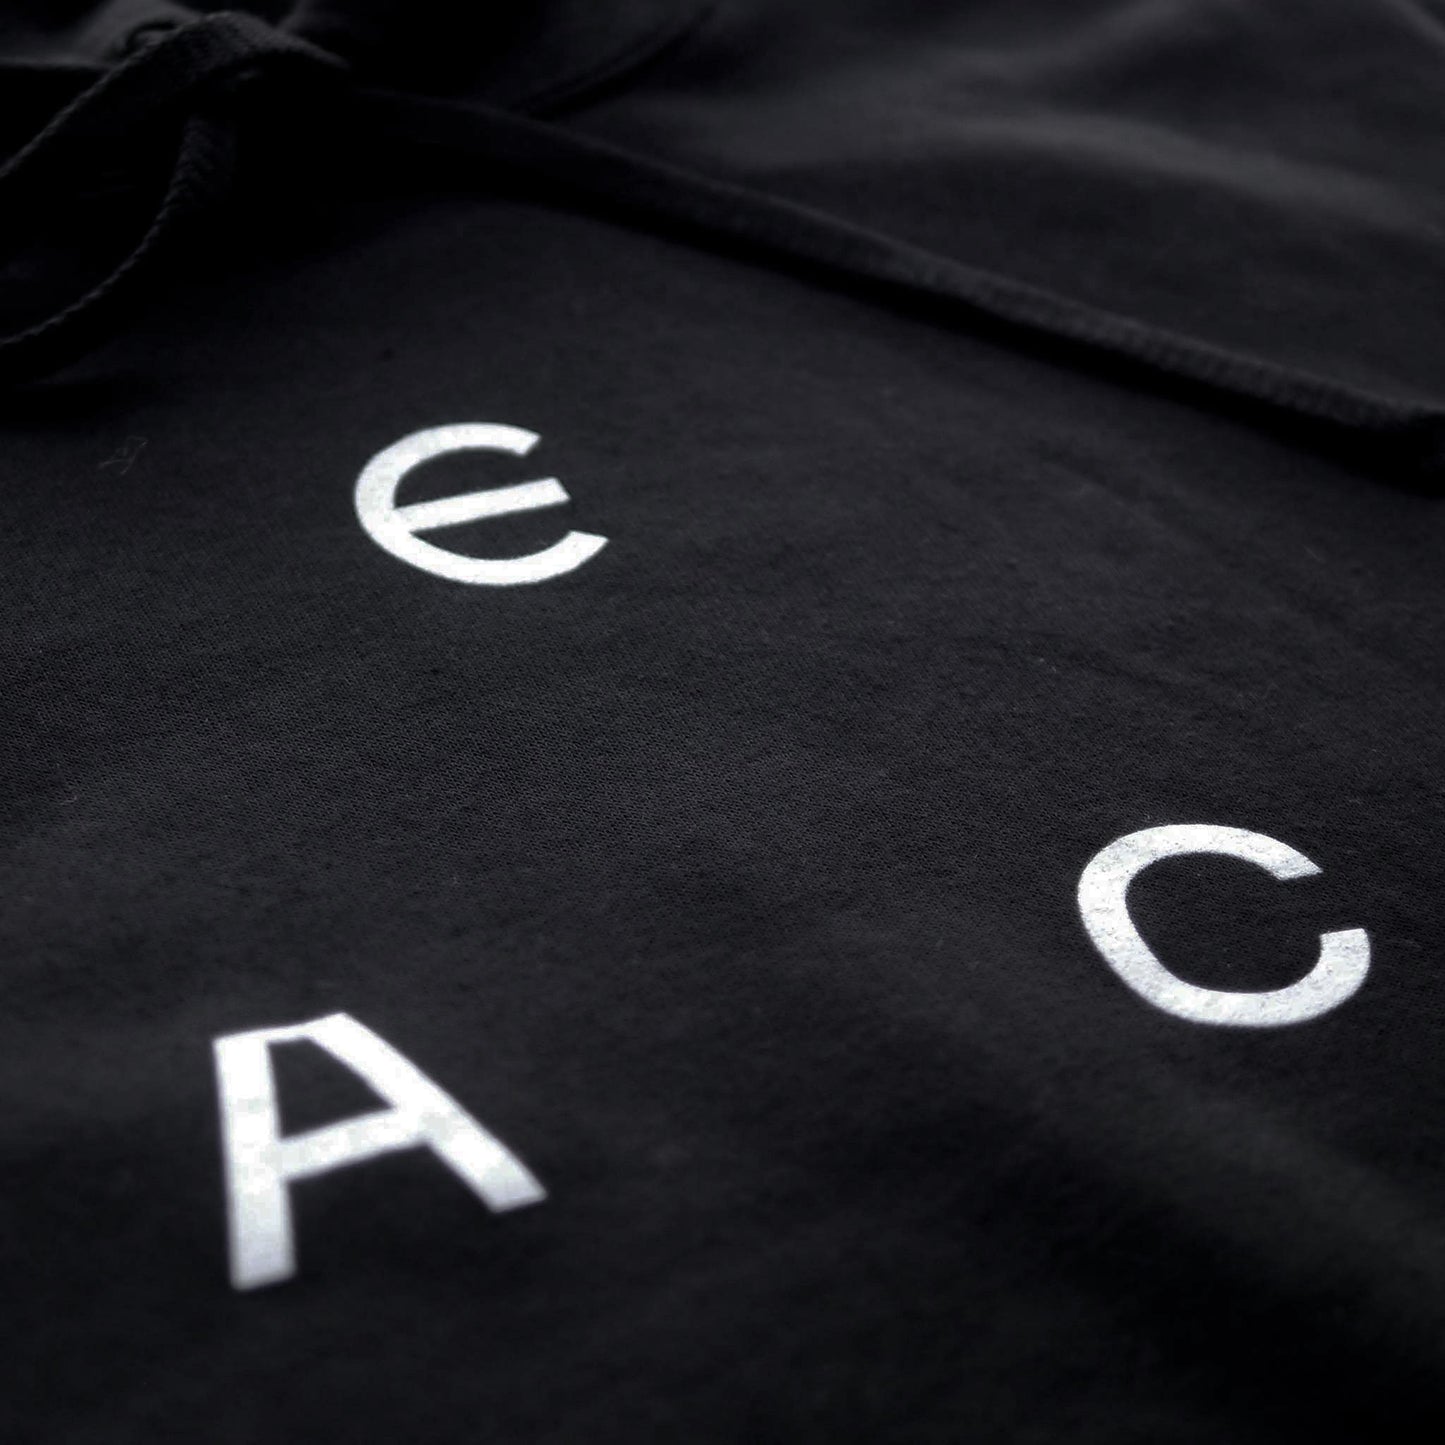 CONFLICT CROPPED HOODIE